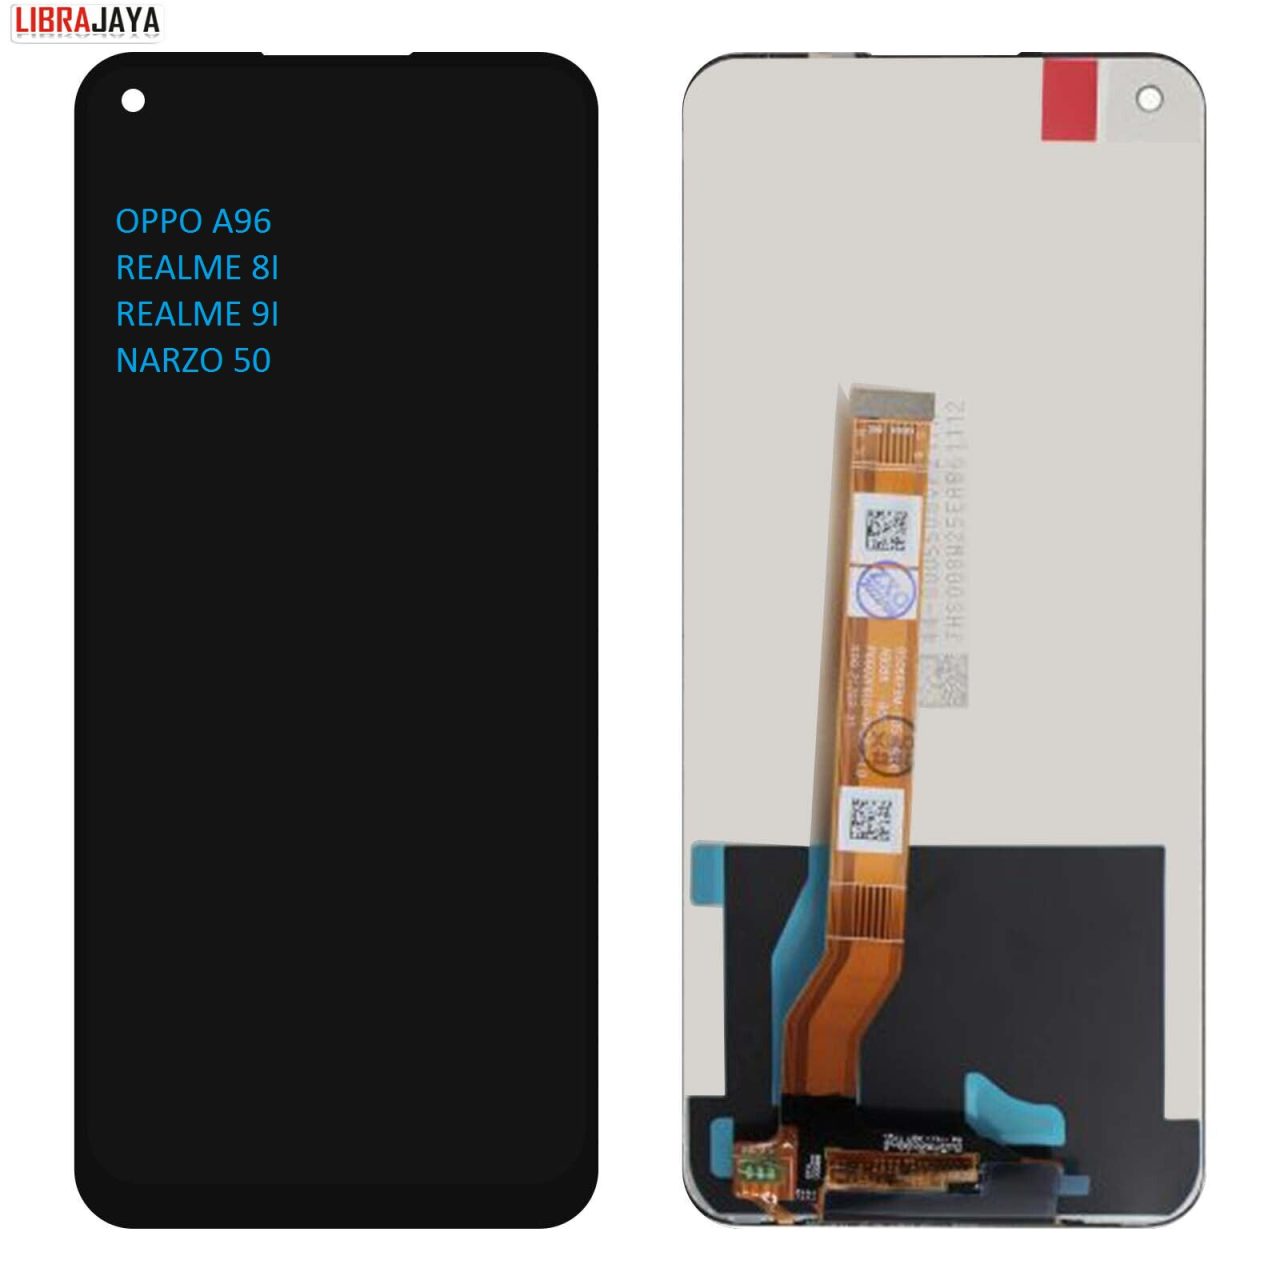 LCD REALME 8I REALME 9I NARZO 50 OPPO A96 LCD Display Digitizer Touch Screen Spare Part Grosir Sparepart hp